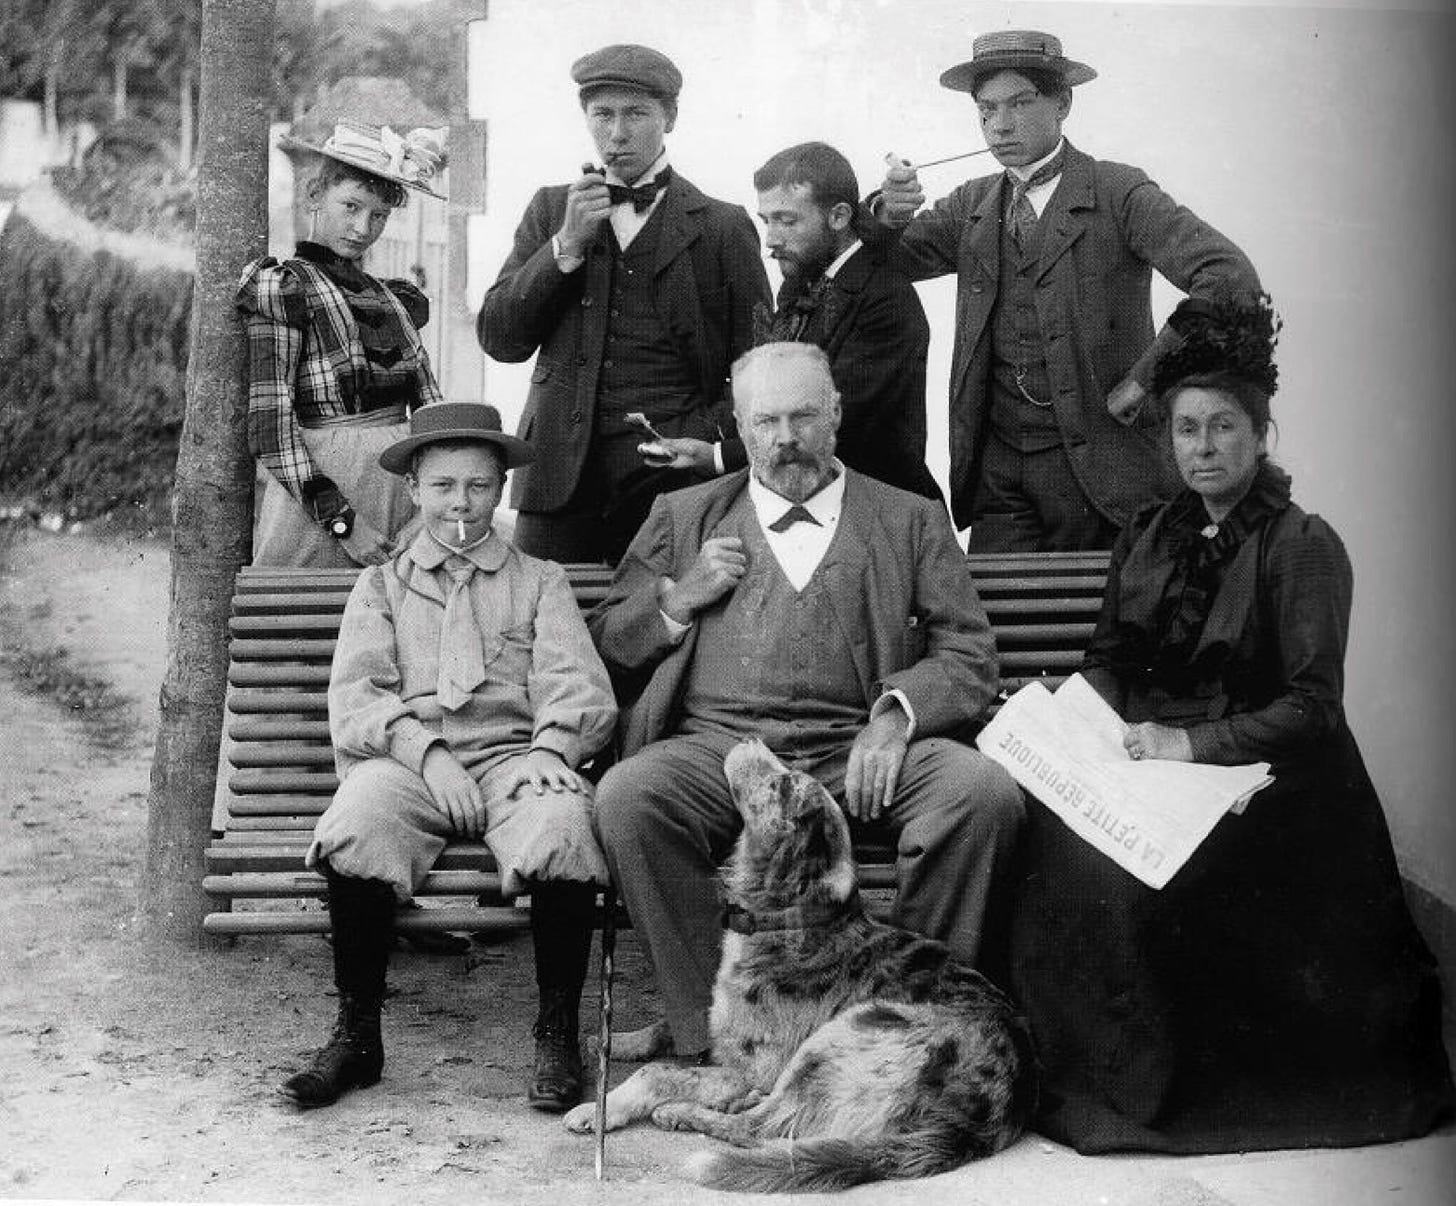 The Keller family in Carnac ca 1900 : from left to right, standing, Geneviève Gallé, Léo Keller, an unidentified man, Jacques Keller ; seated, Paul, Charles, and Mathilde Keller (private collection).